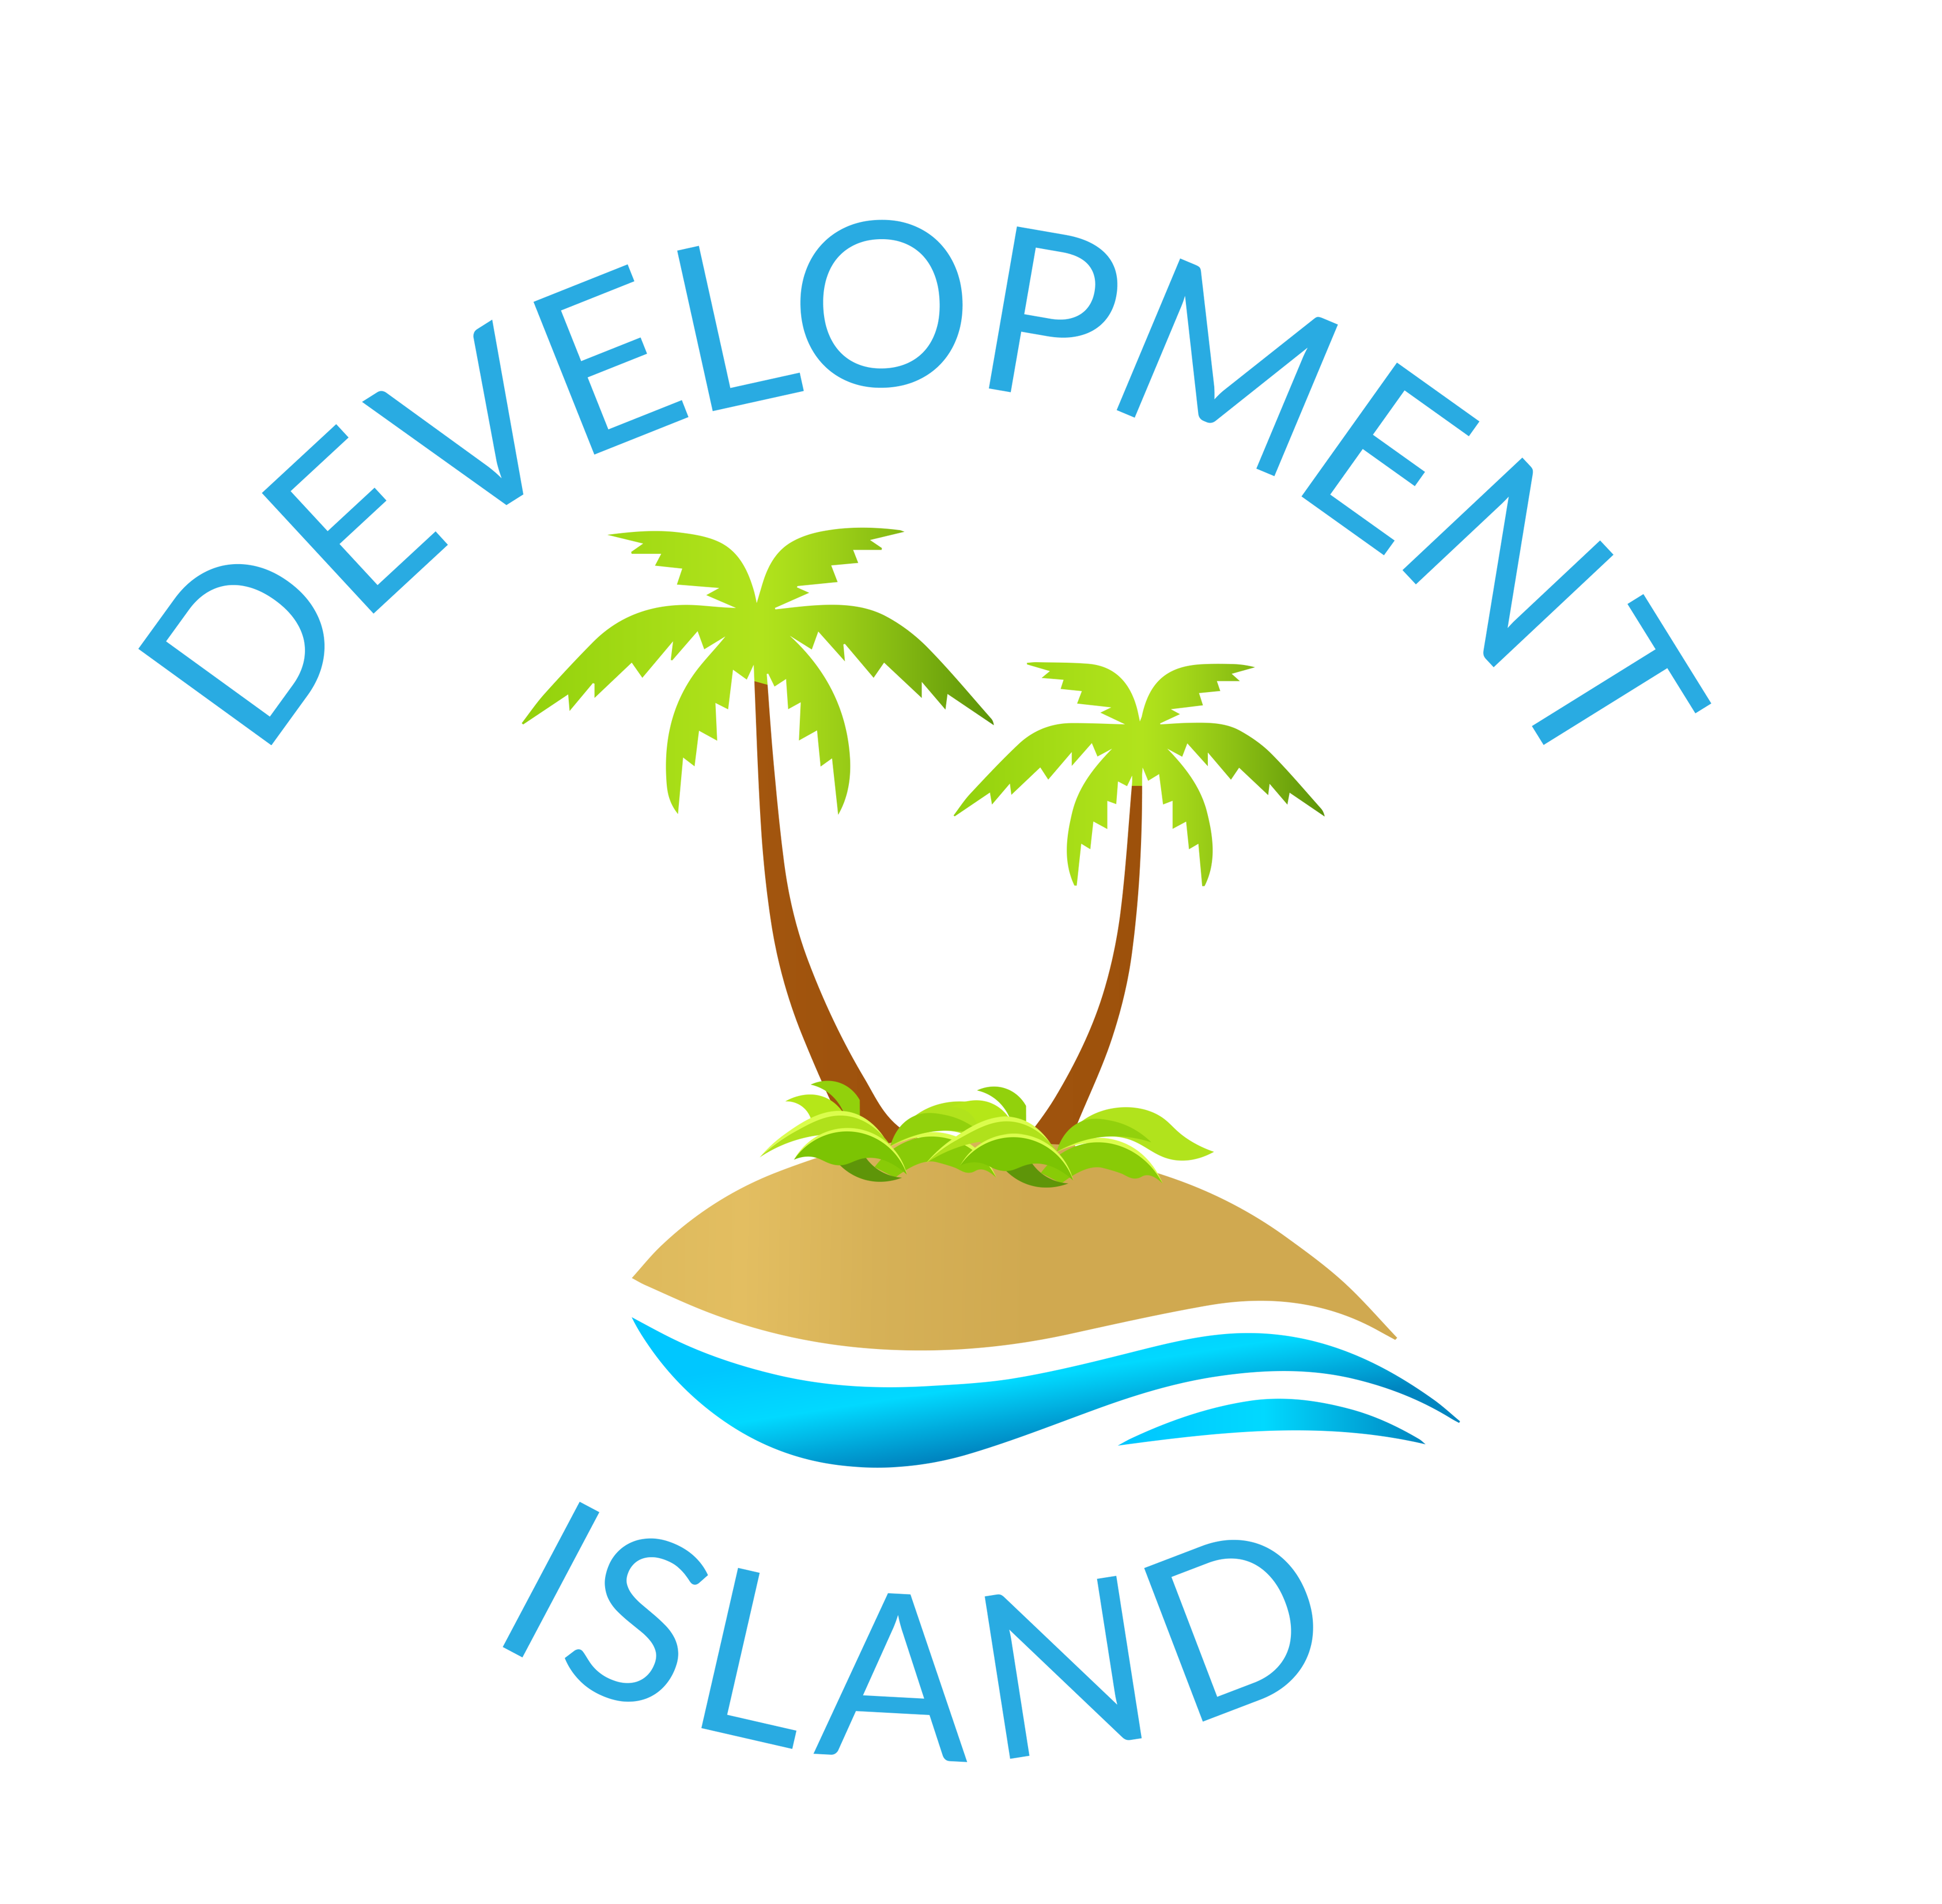 More about Development Island